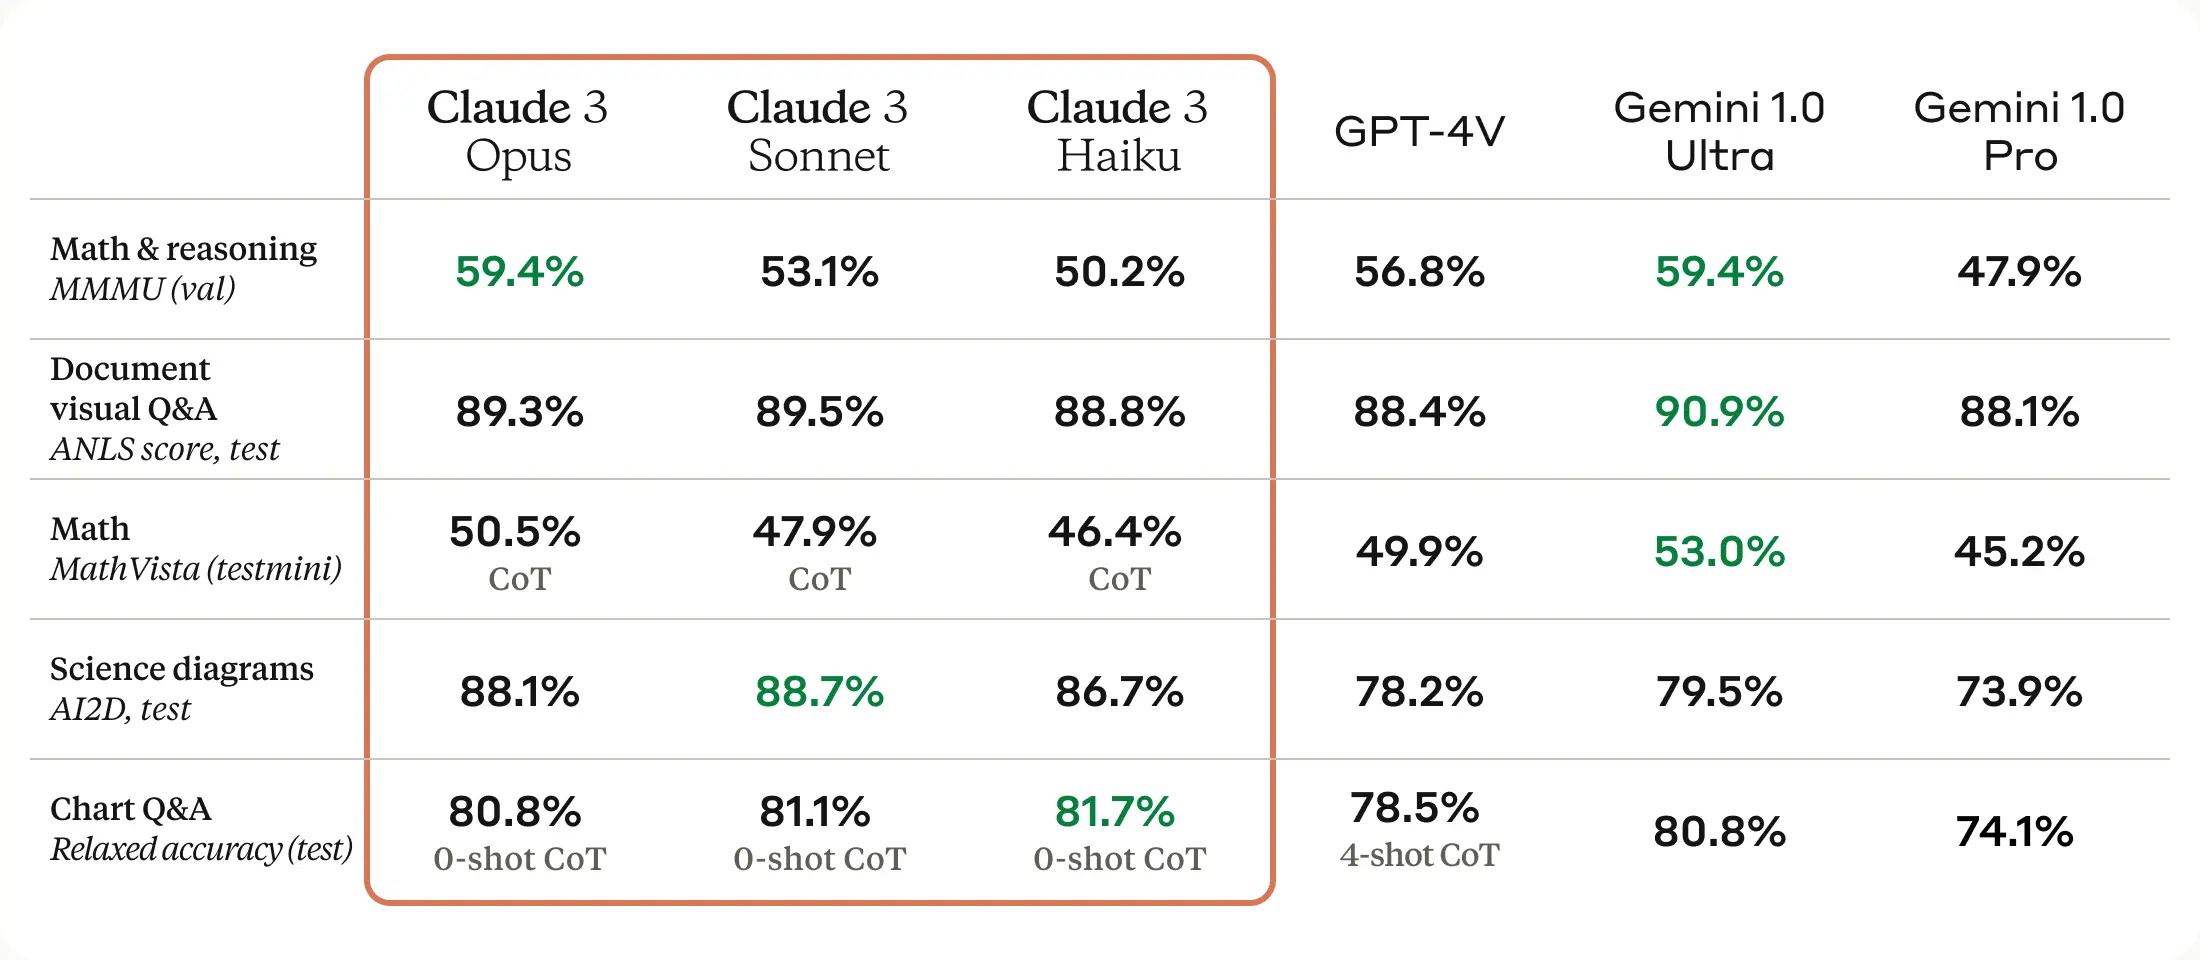 Visual-oriented benchmarks that compare the capabilities of Claude AI, GPT-4, Google Gemini